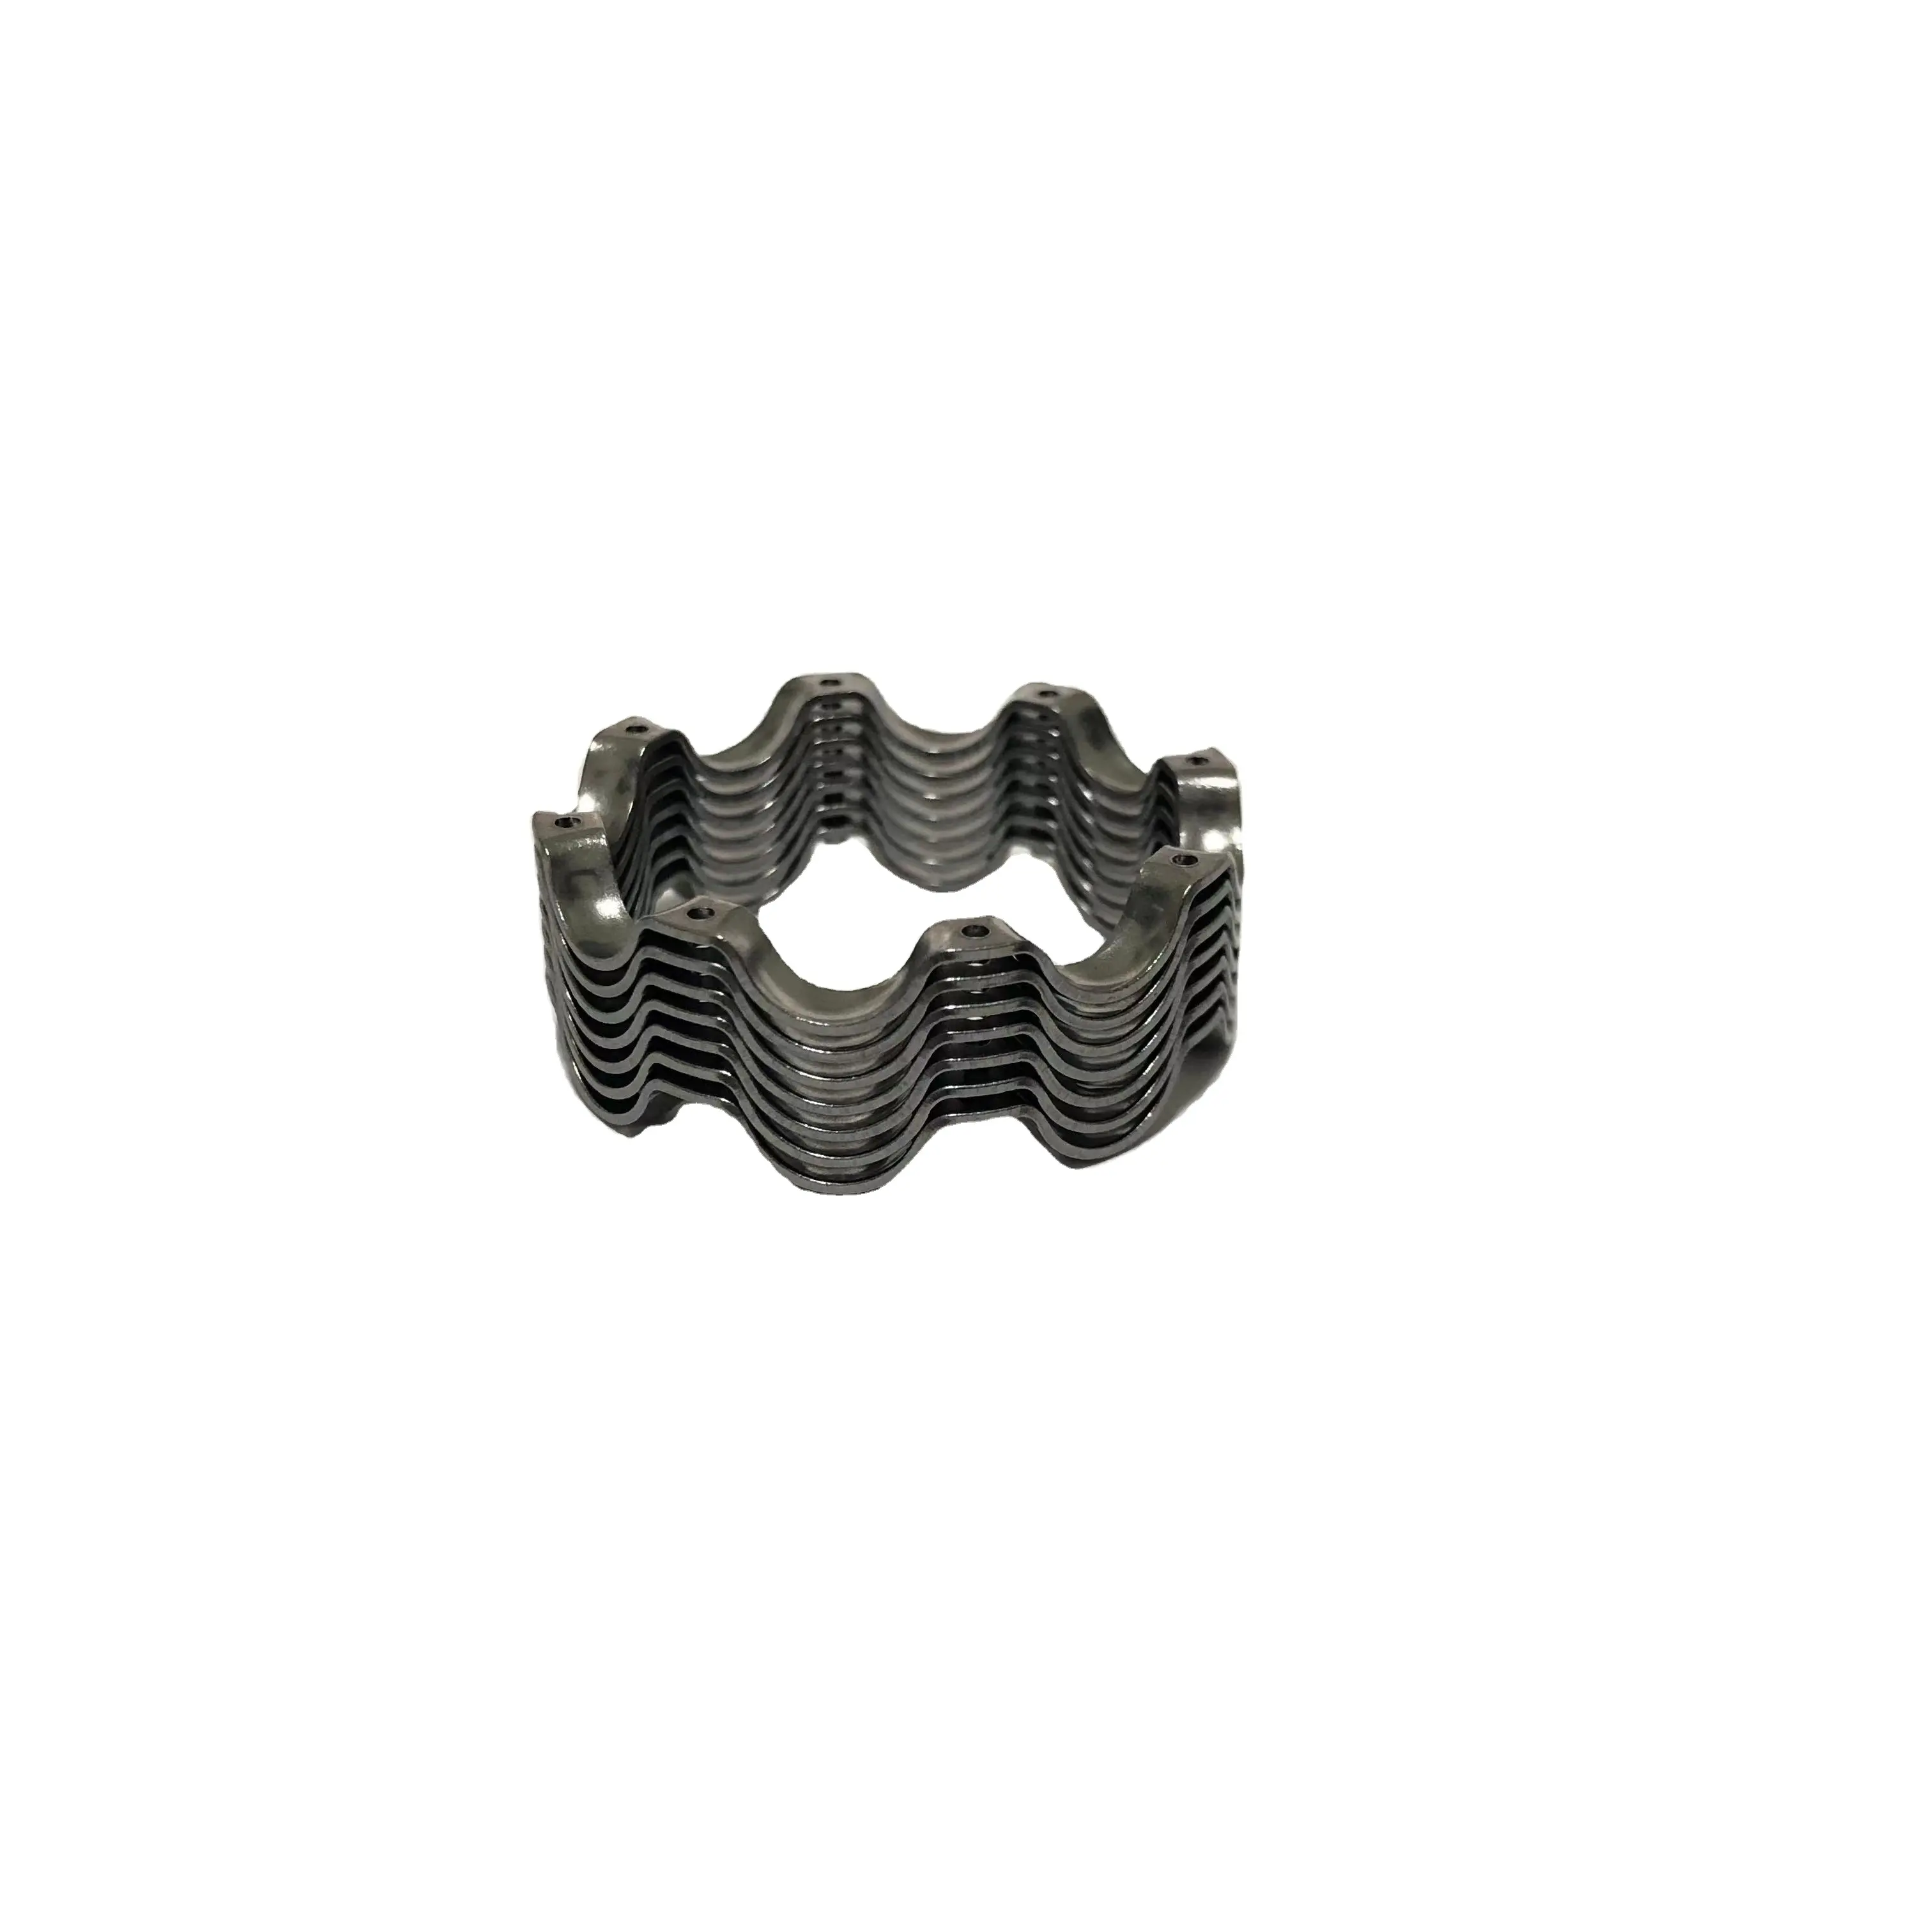 Fine production of self-aligning ball bearing cage 6000 self-aligning ball bearing cage accessories